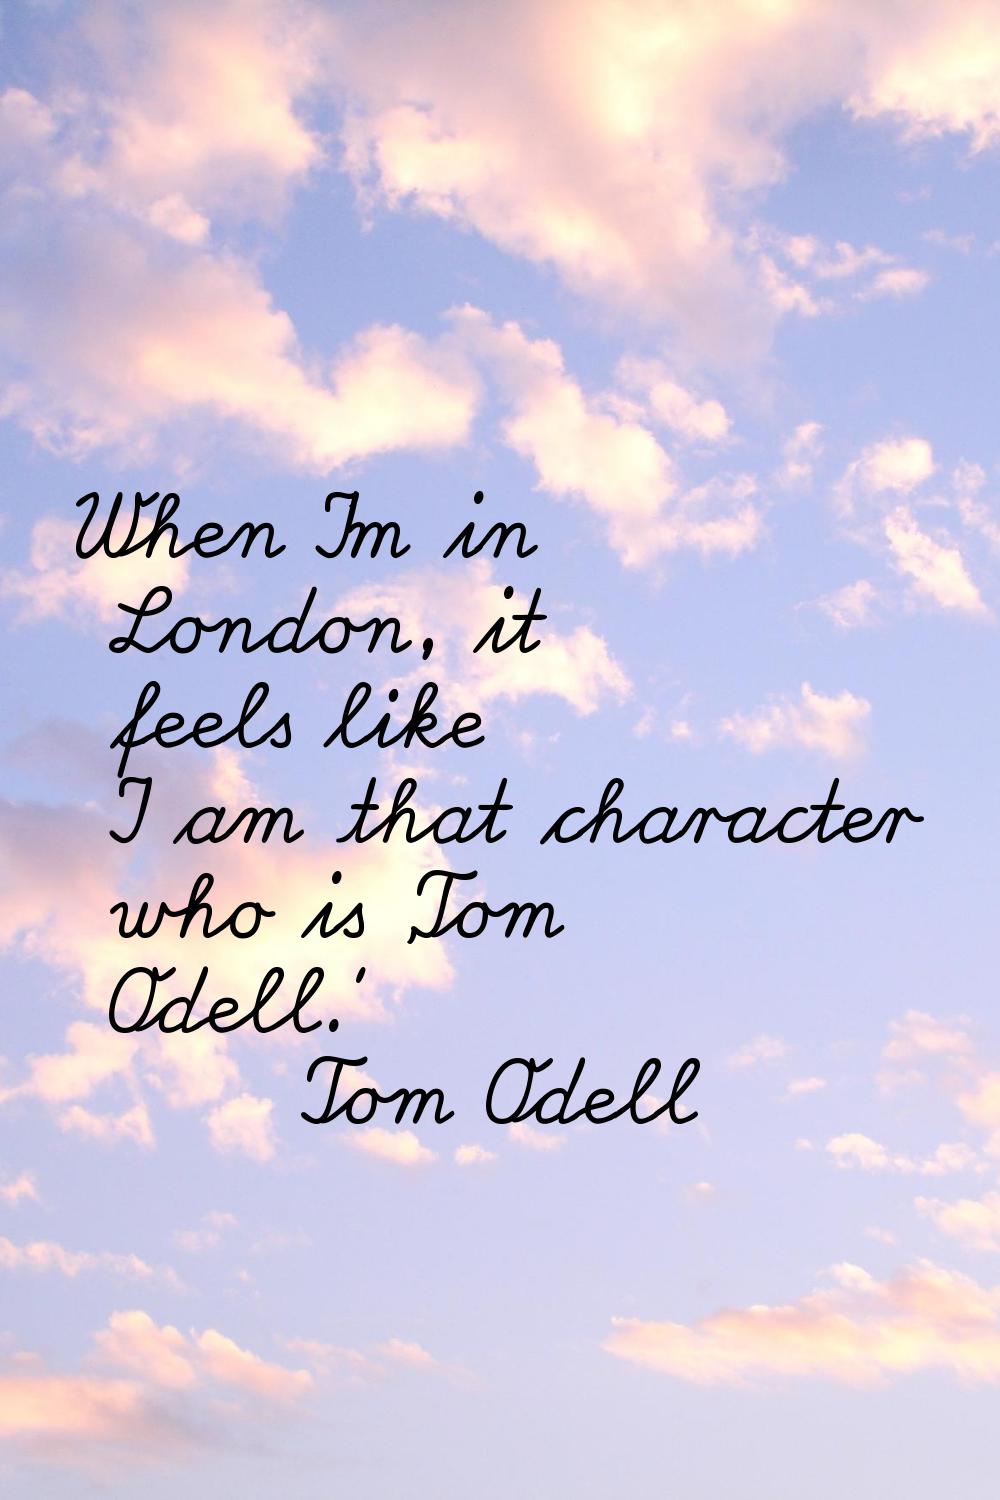 When I'm in London, it feels like I am that character who is 'Tom Odell.'